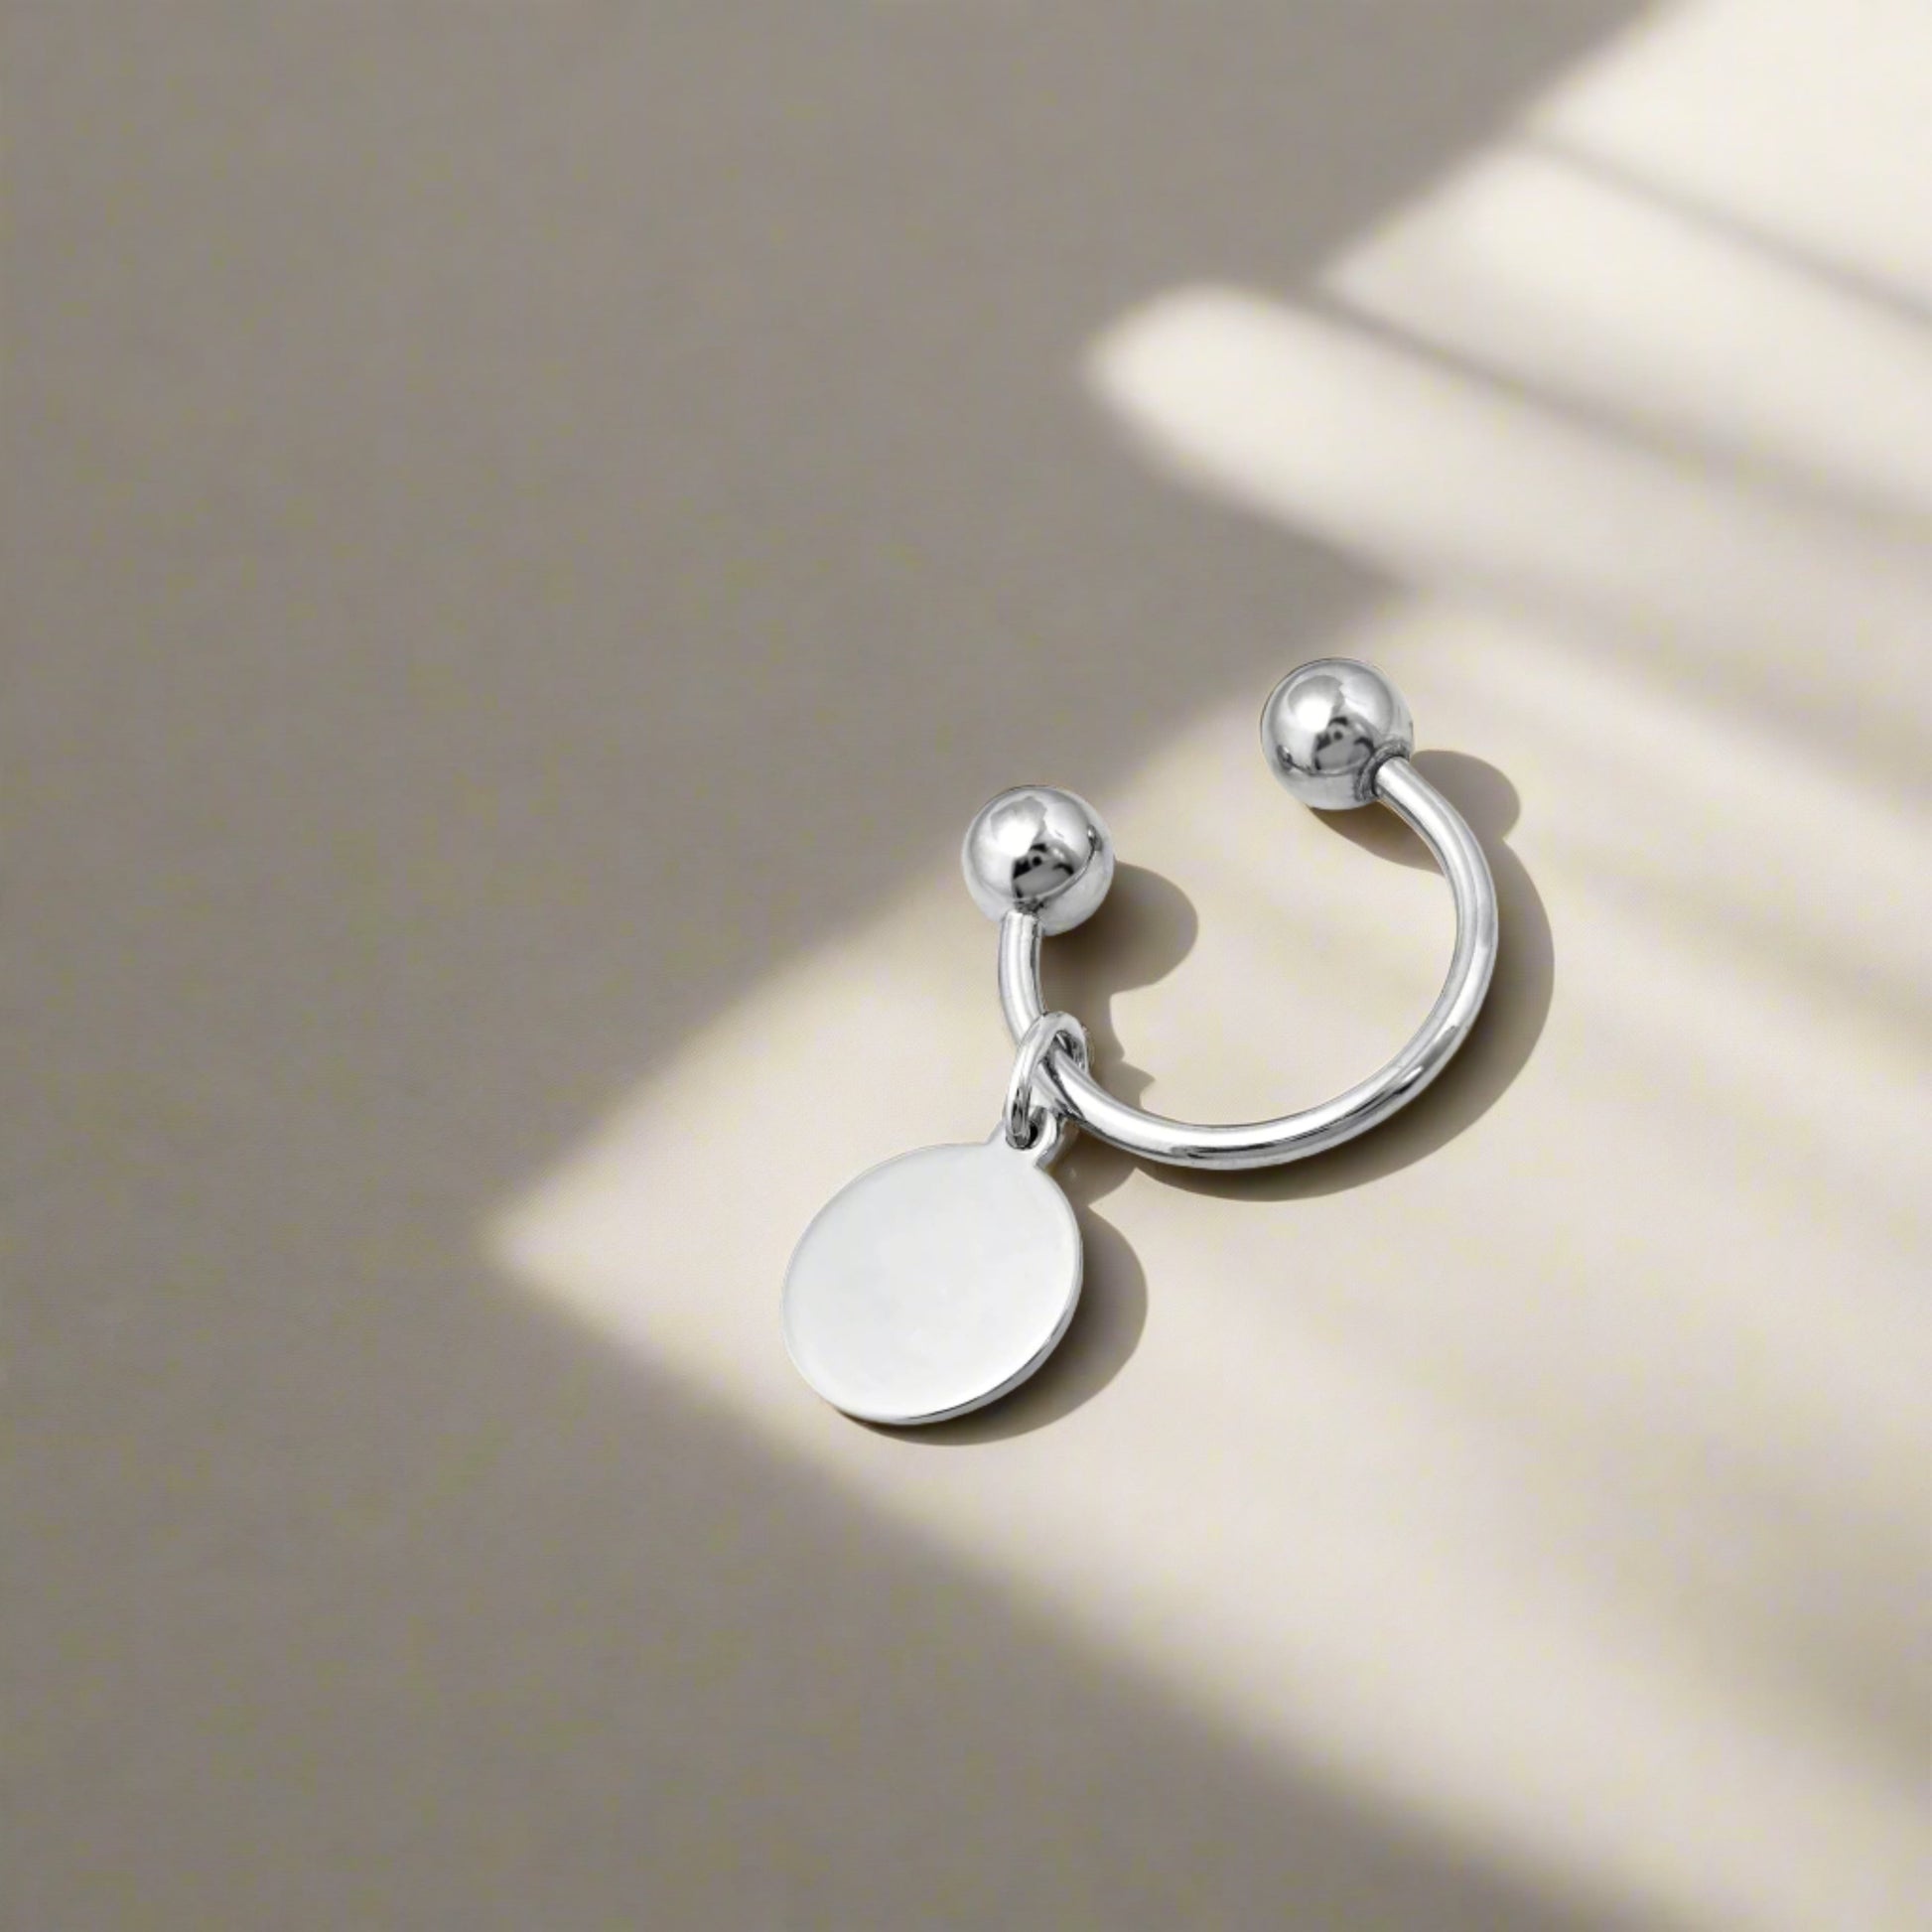 Sterling Silver Round Key Ring with Screw Ball